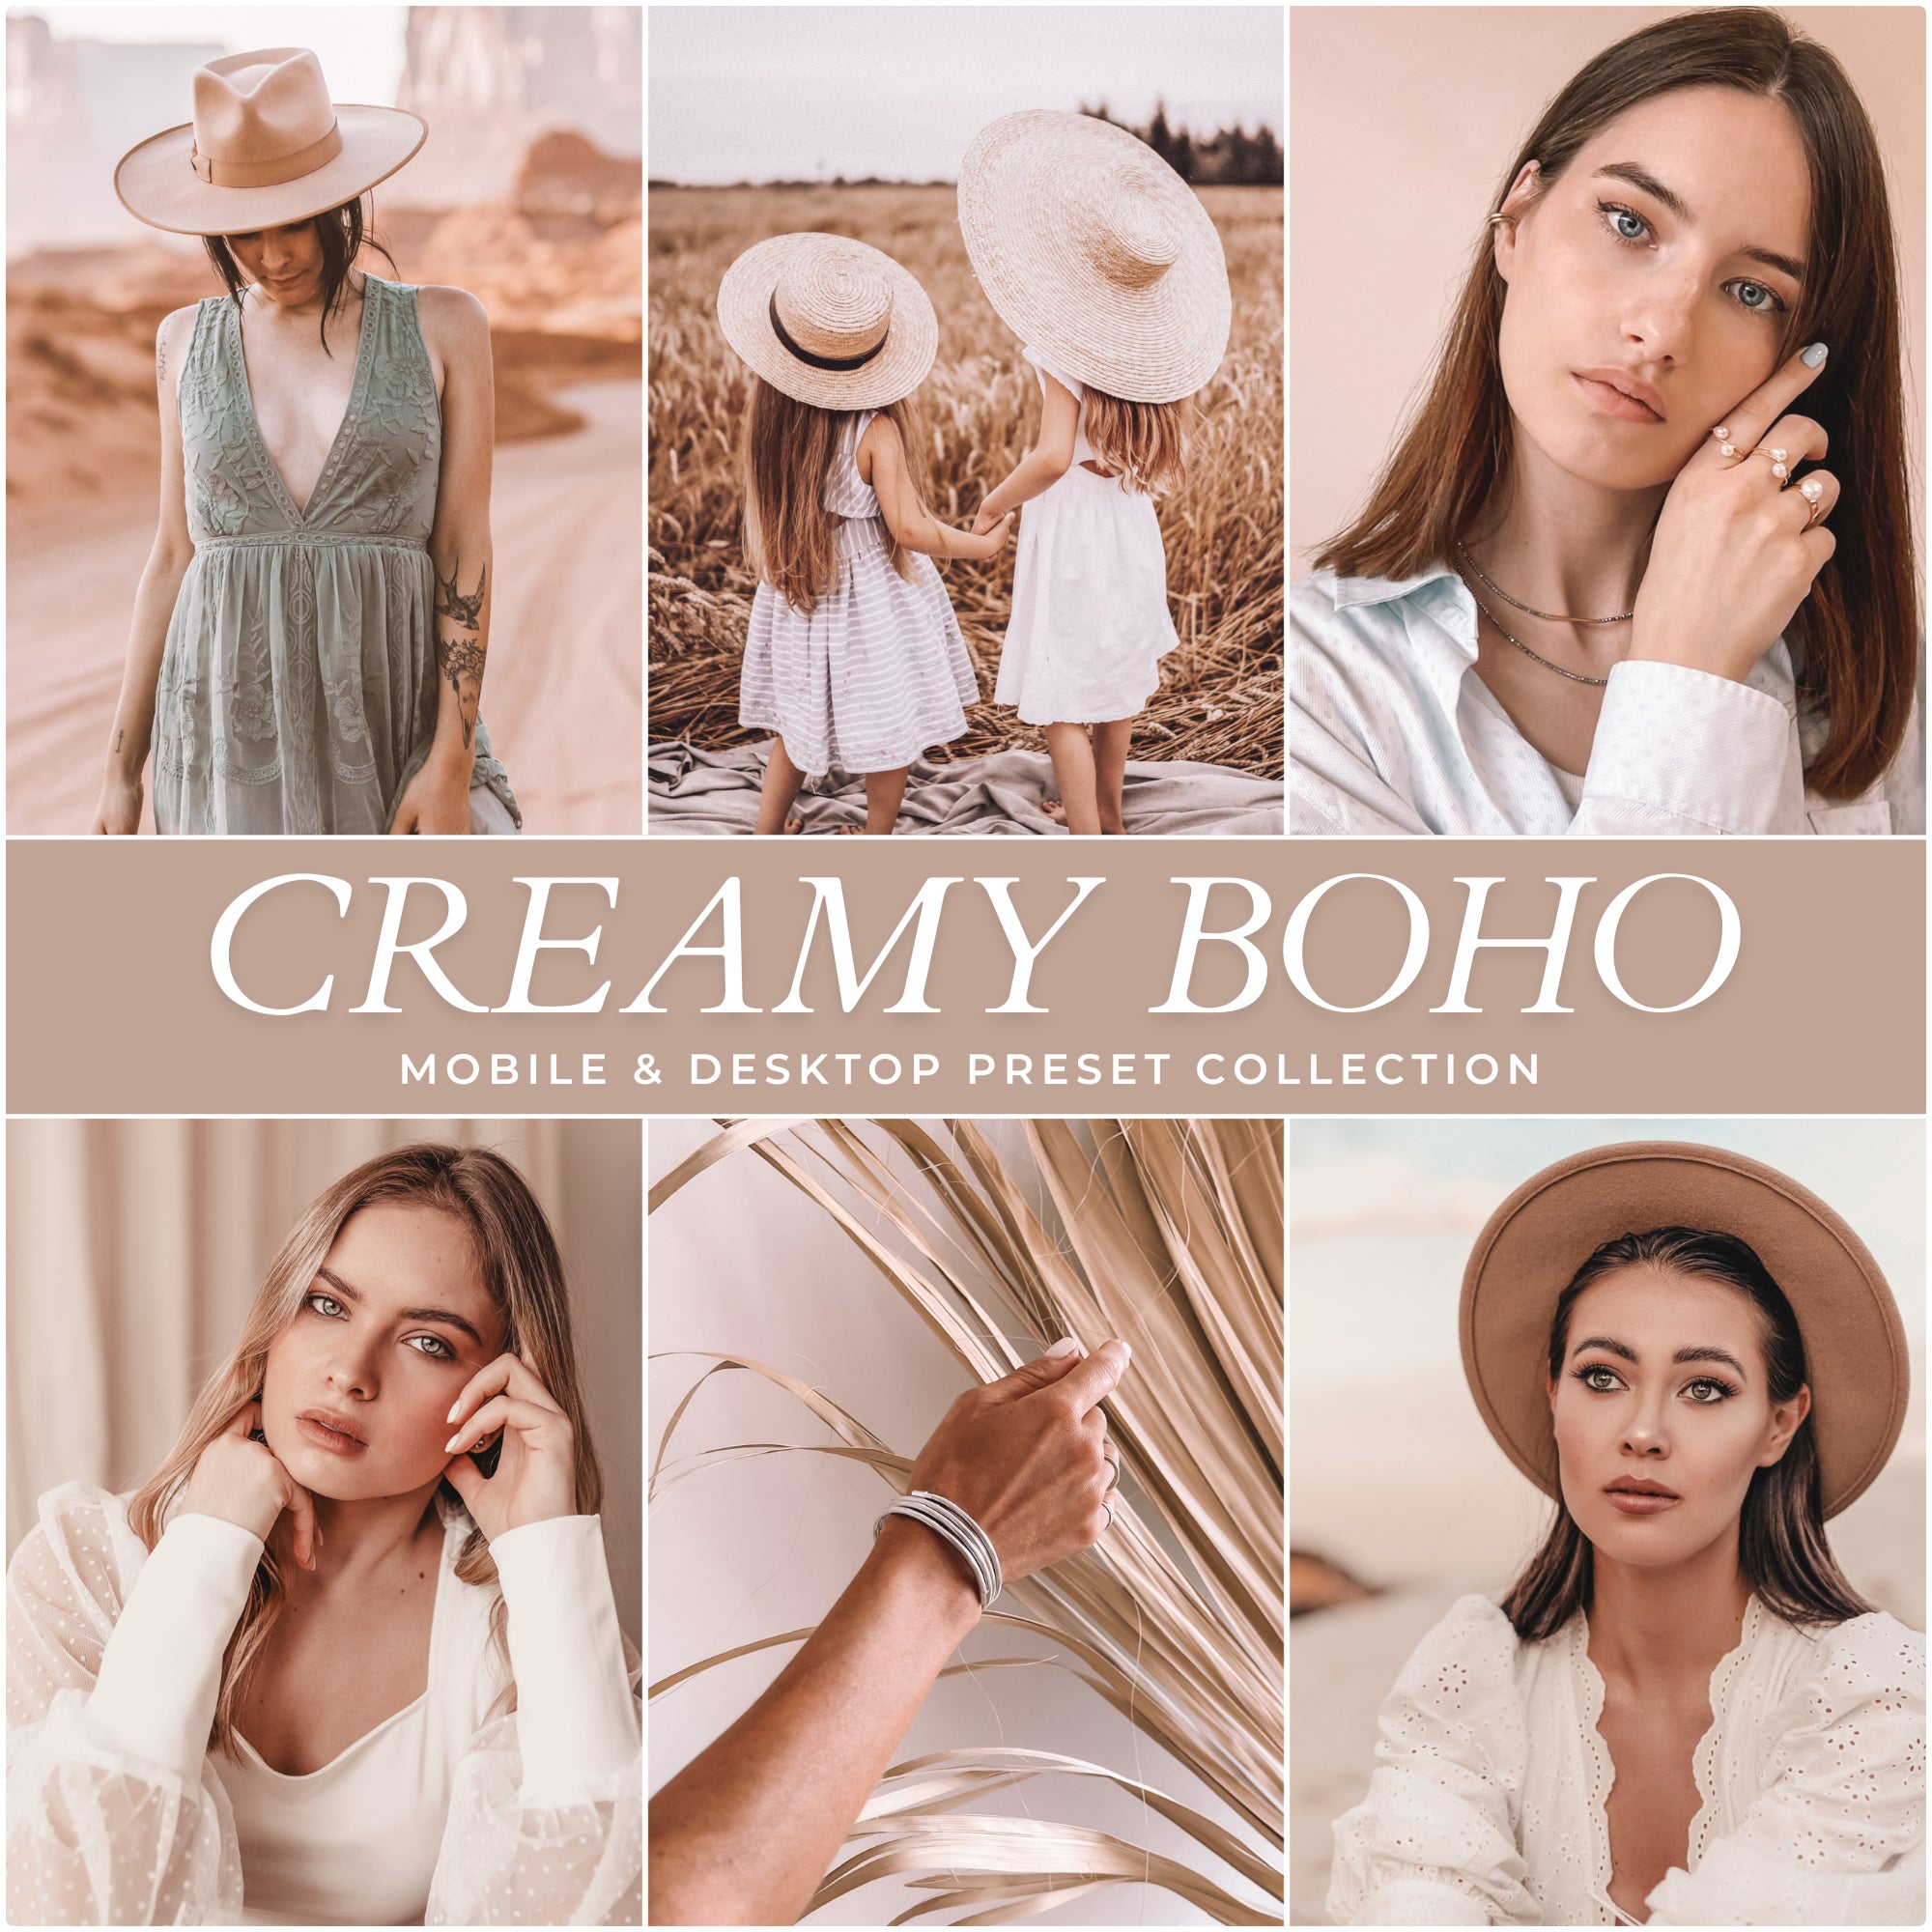 Creamy Boho Lightroom Presets The Best Instagram Influencer and Blogger Presets by Lou And marks Presets